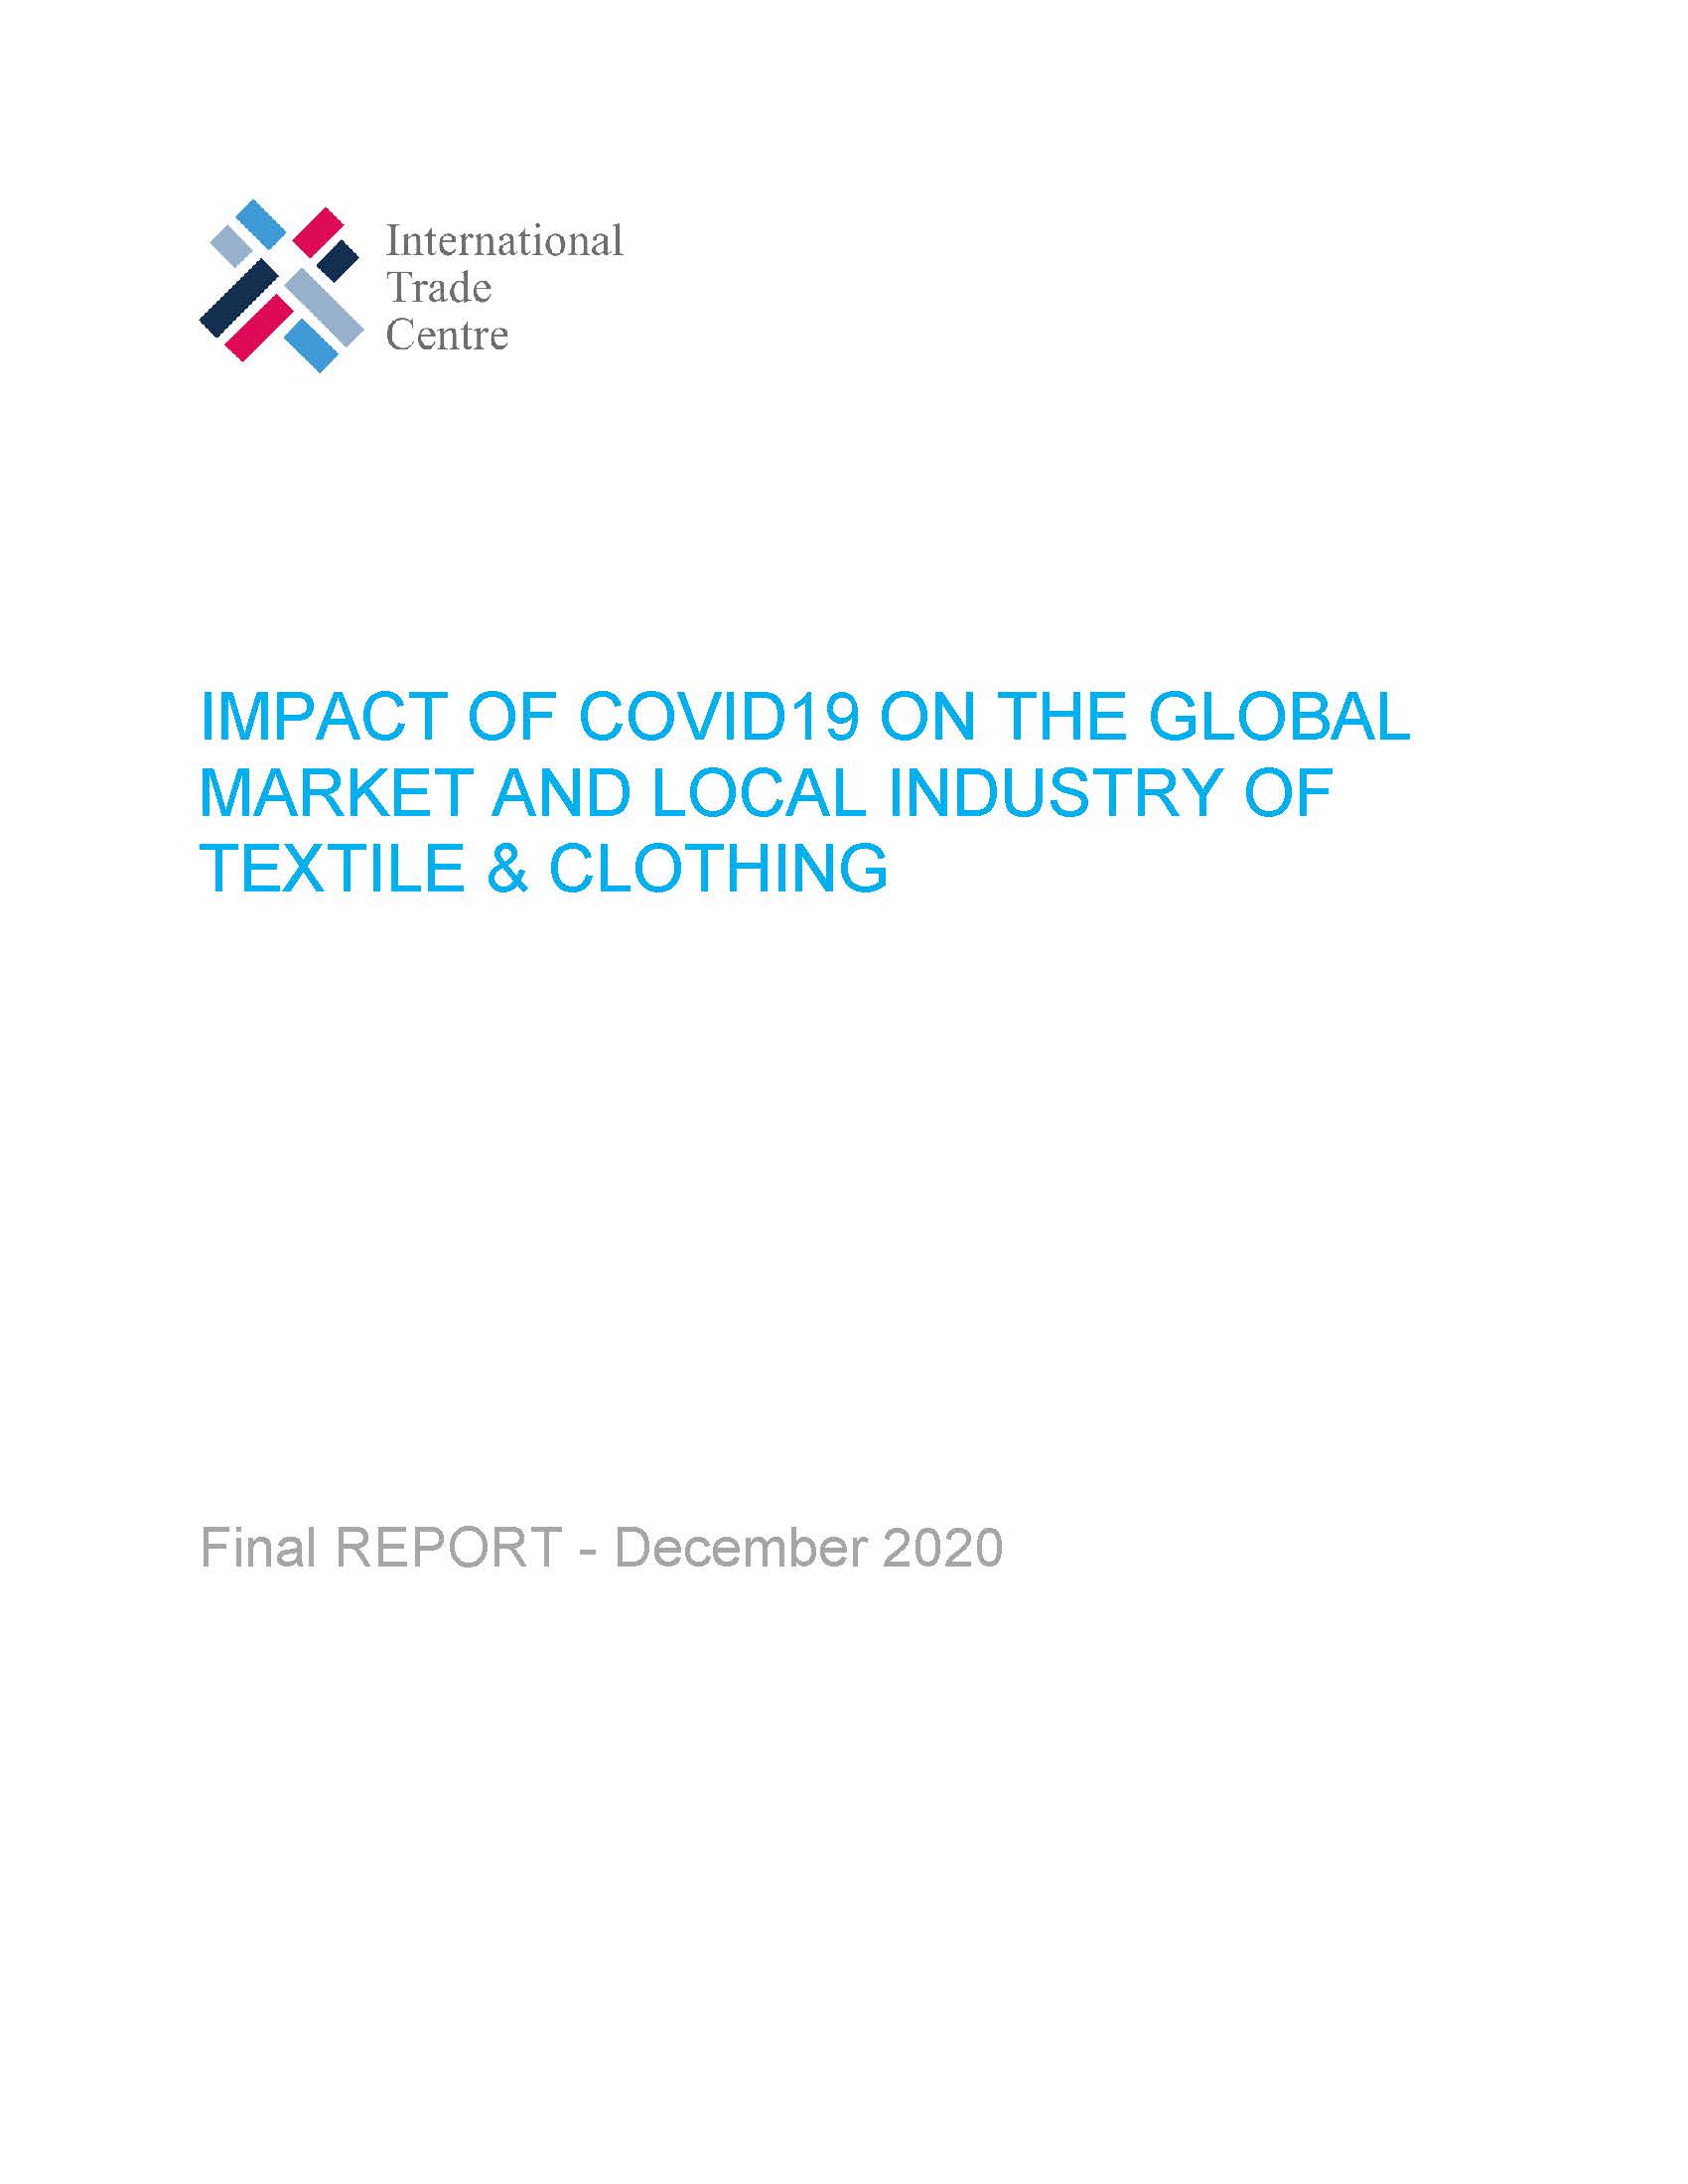 Impact of COVID-19 on the Global Market and Local Industry of Textile and Clothing